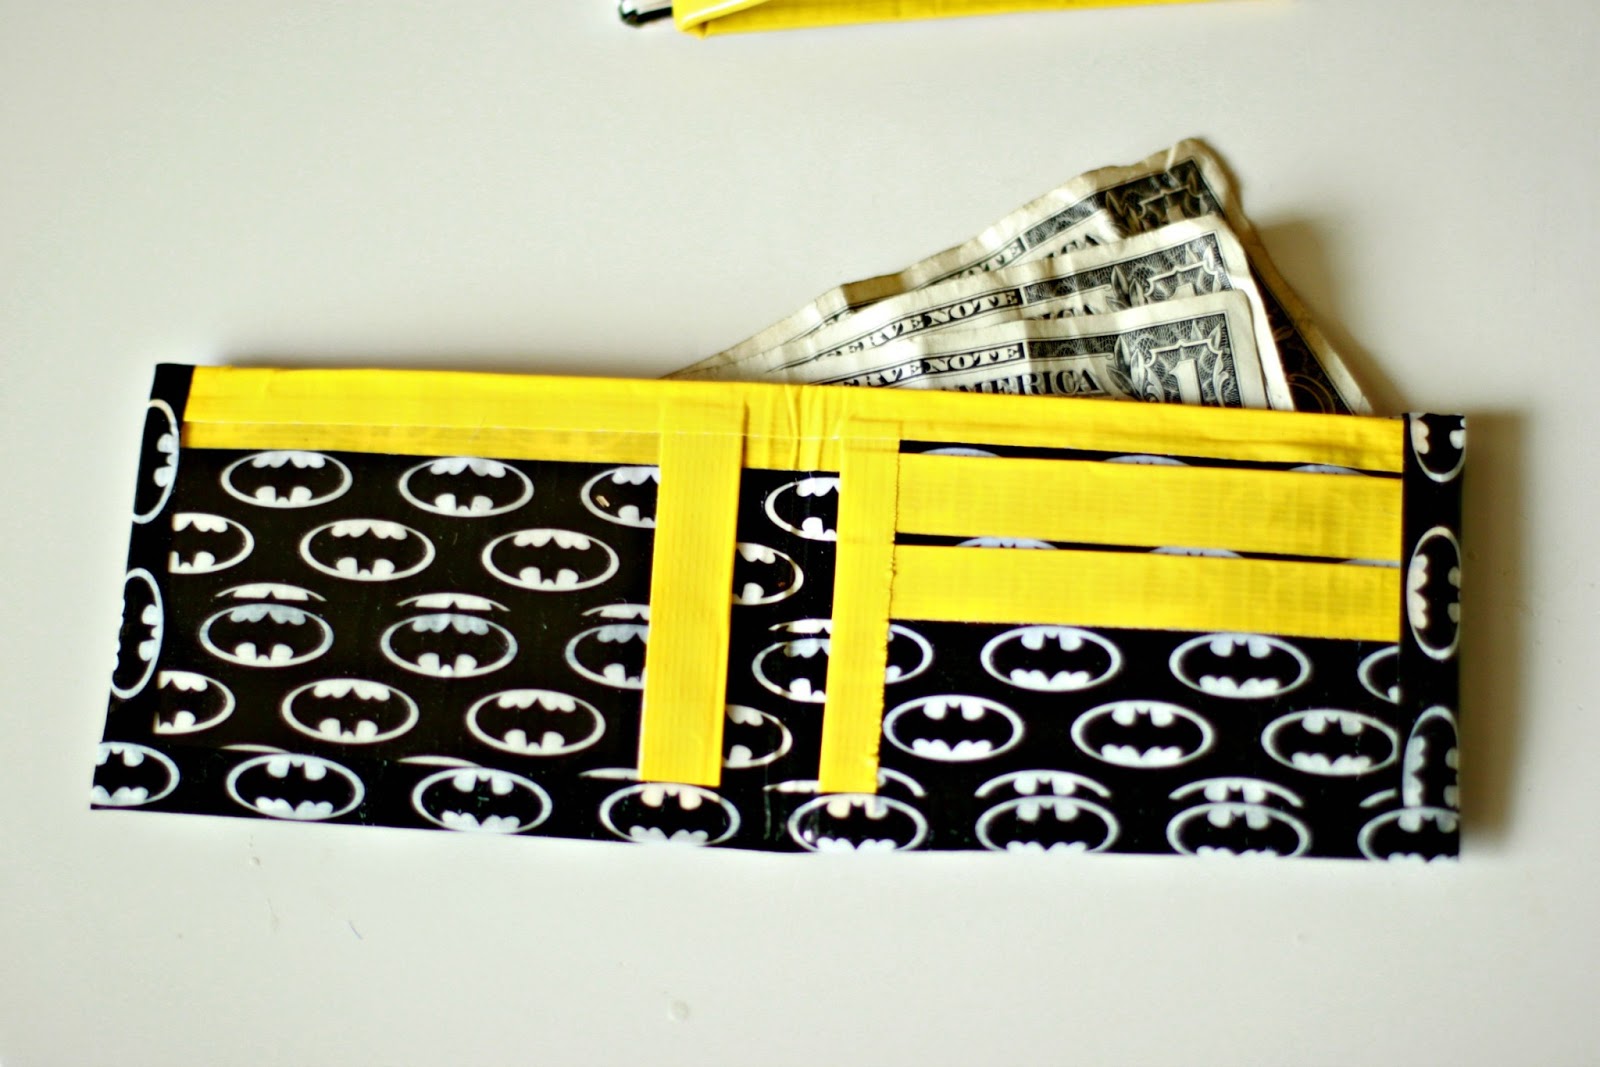 6 fun DIY duct tape projects